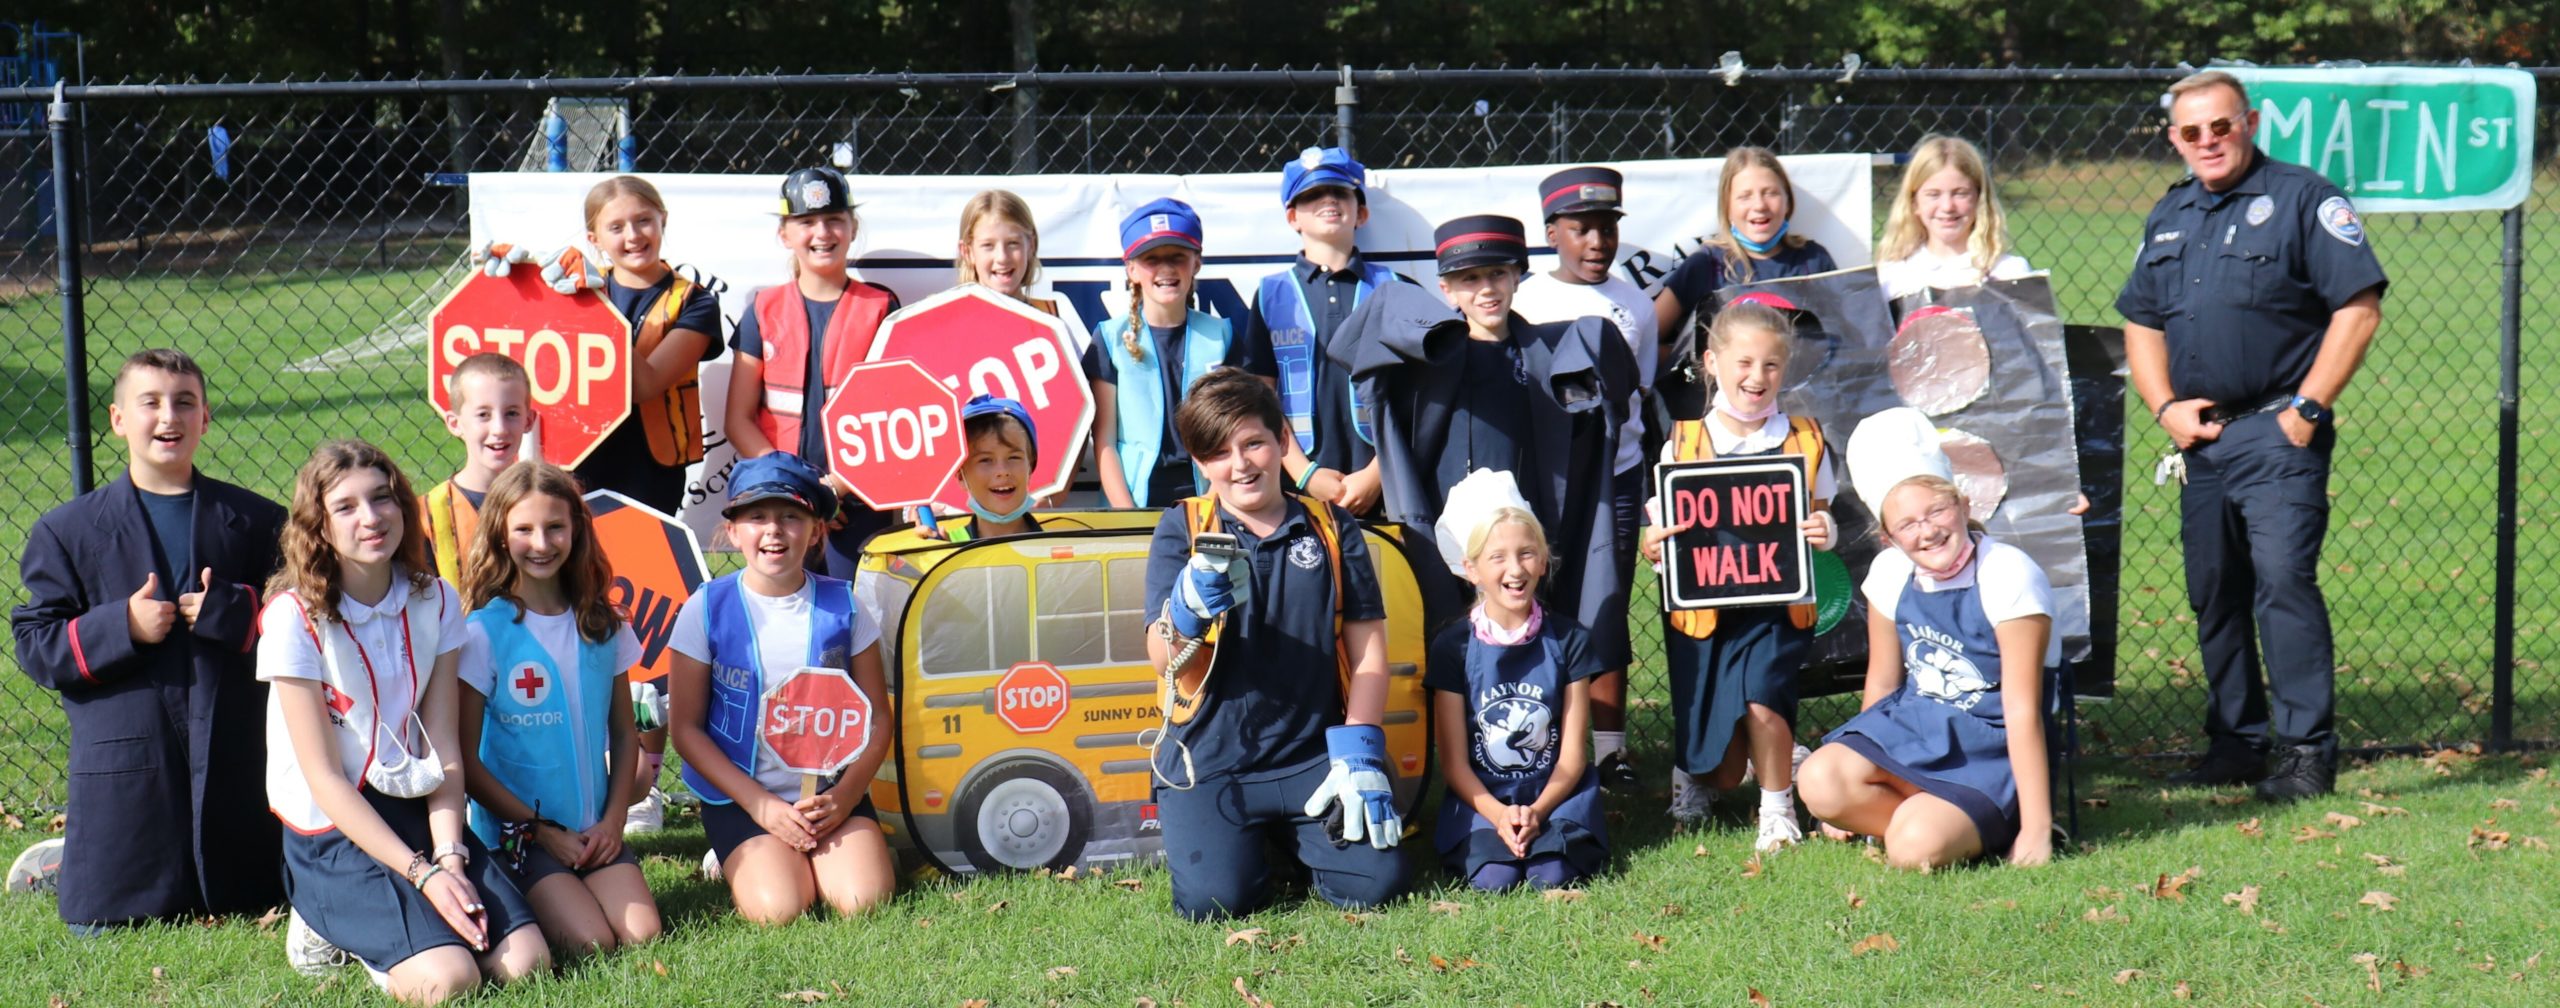 Raynor Country Day School held its annual Tykes on Bikes- Safety Town event last week, during which Southampton Town Police Officer Eric Plum posed with his fellow 